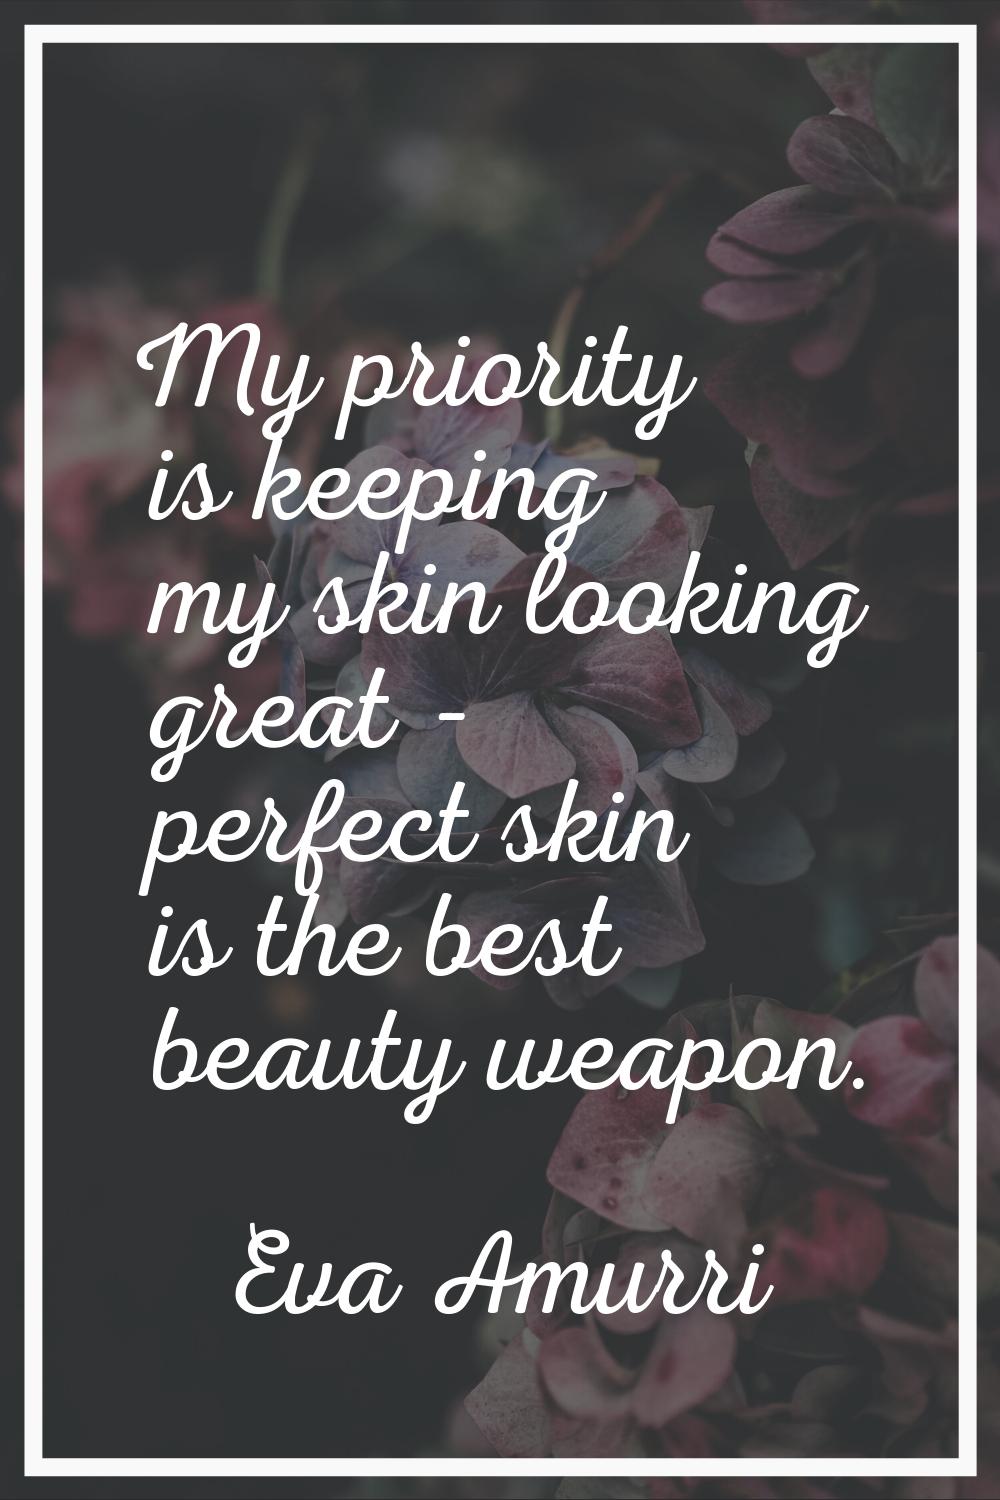 My priority is keeping my skin looking great - perfect skin is the best beauty weapon.